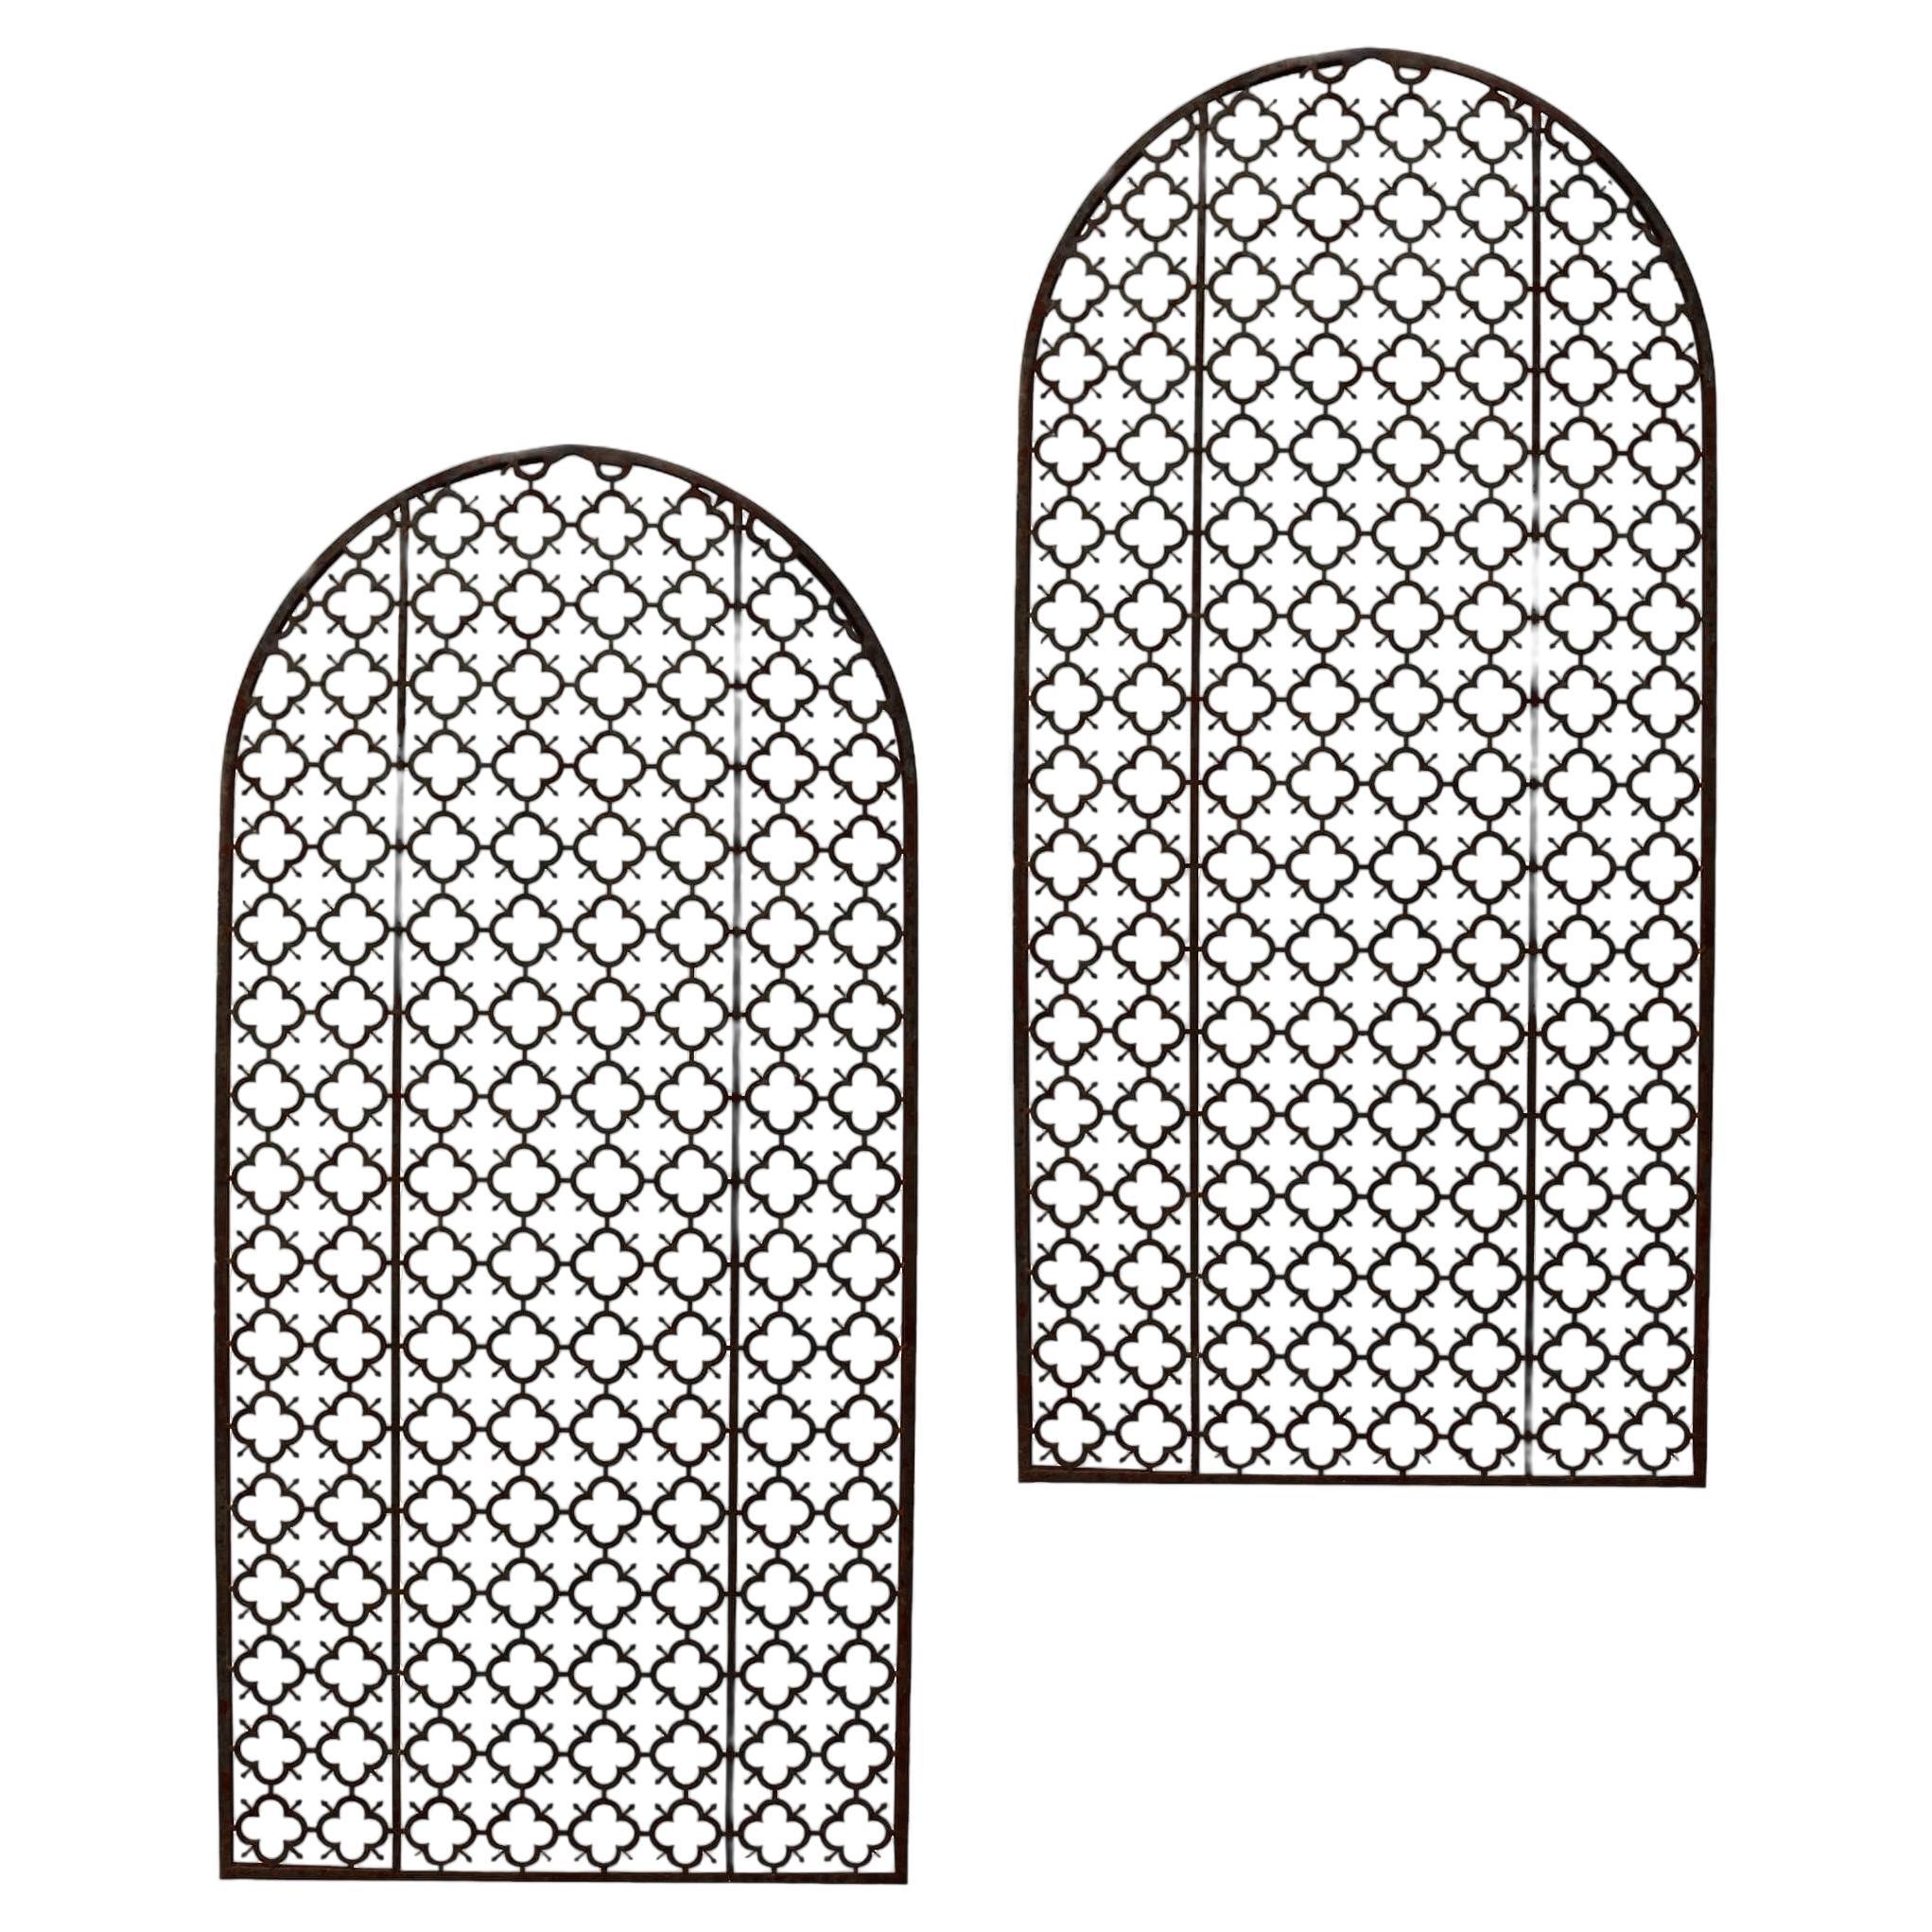 Pair of Large Arched Reclaimed Steel Garden Trellis Panels